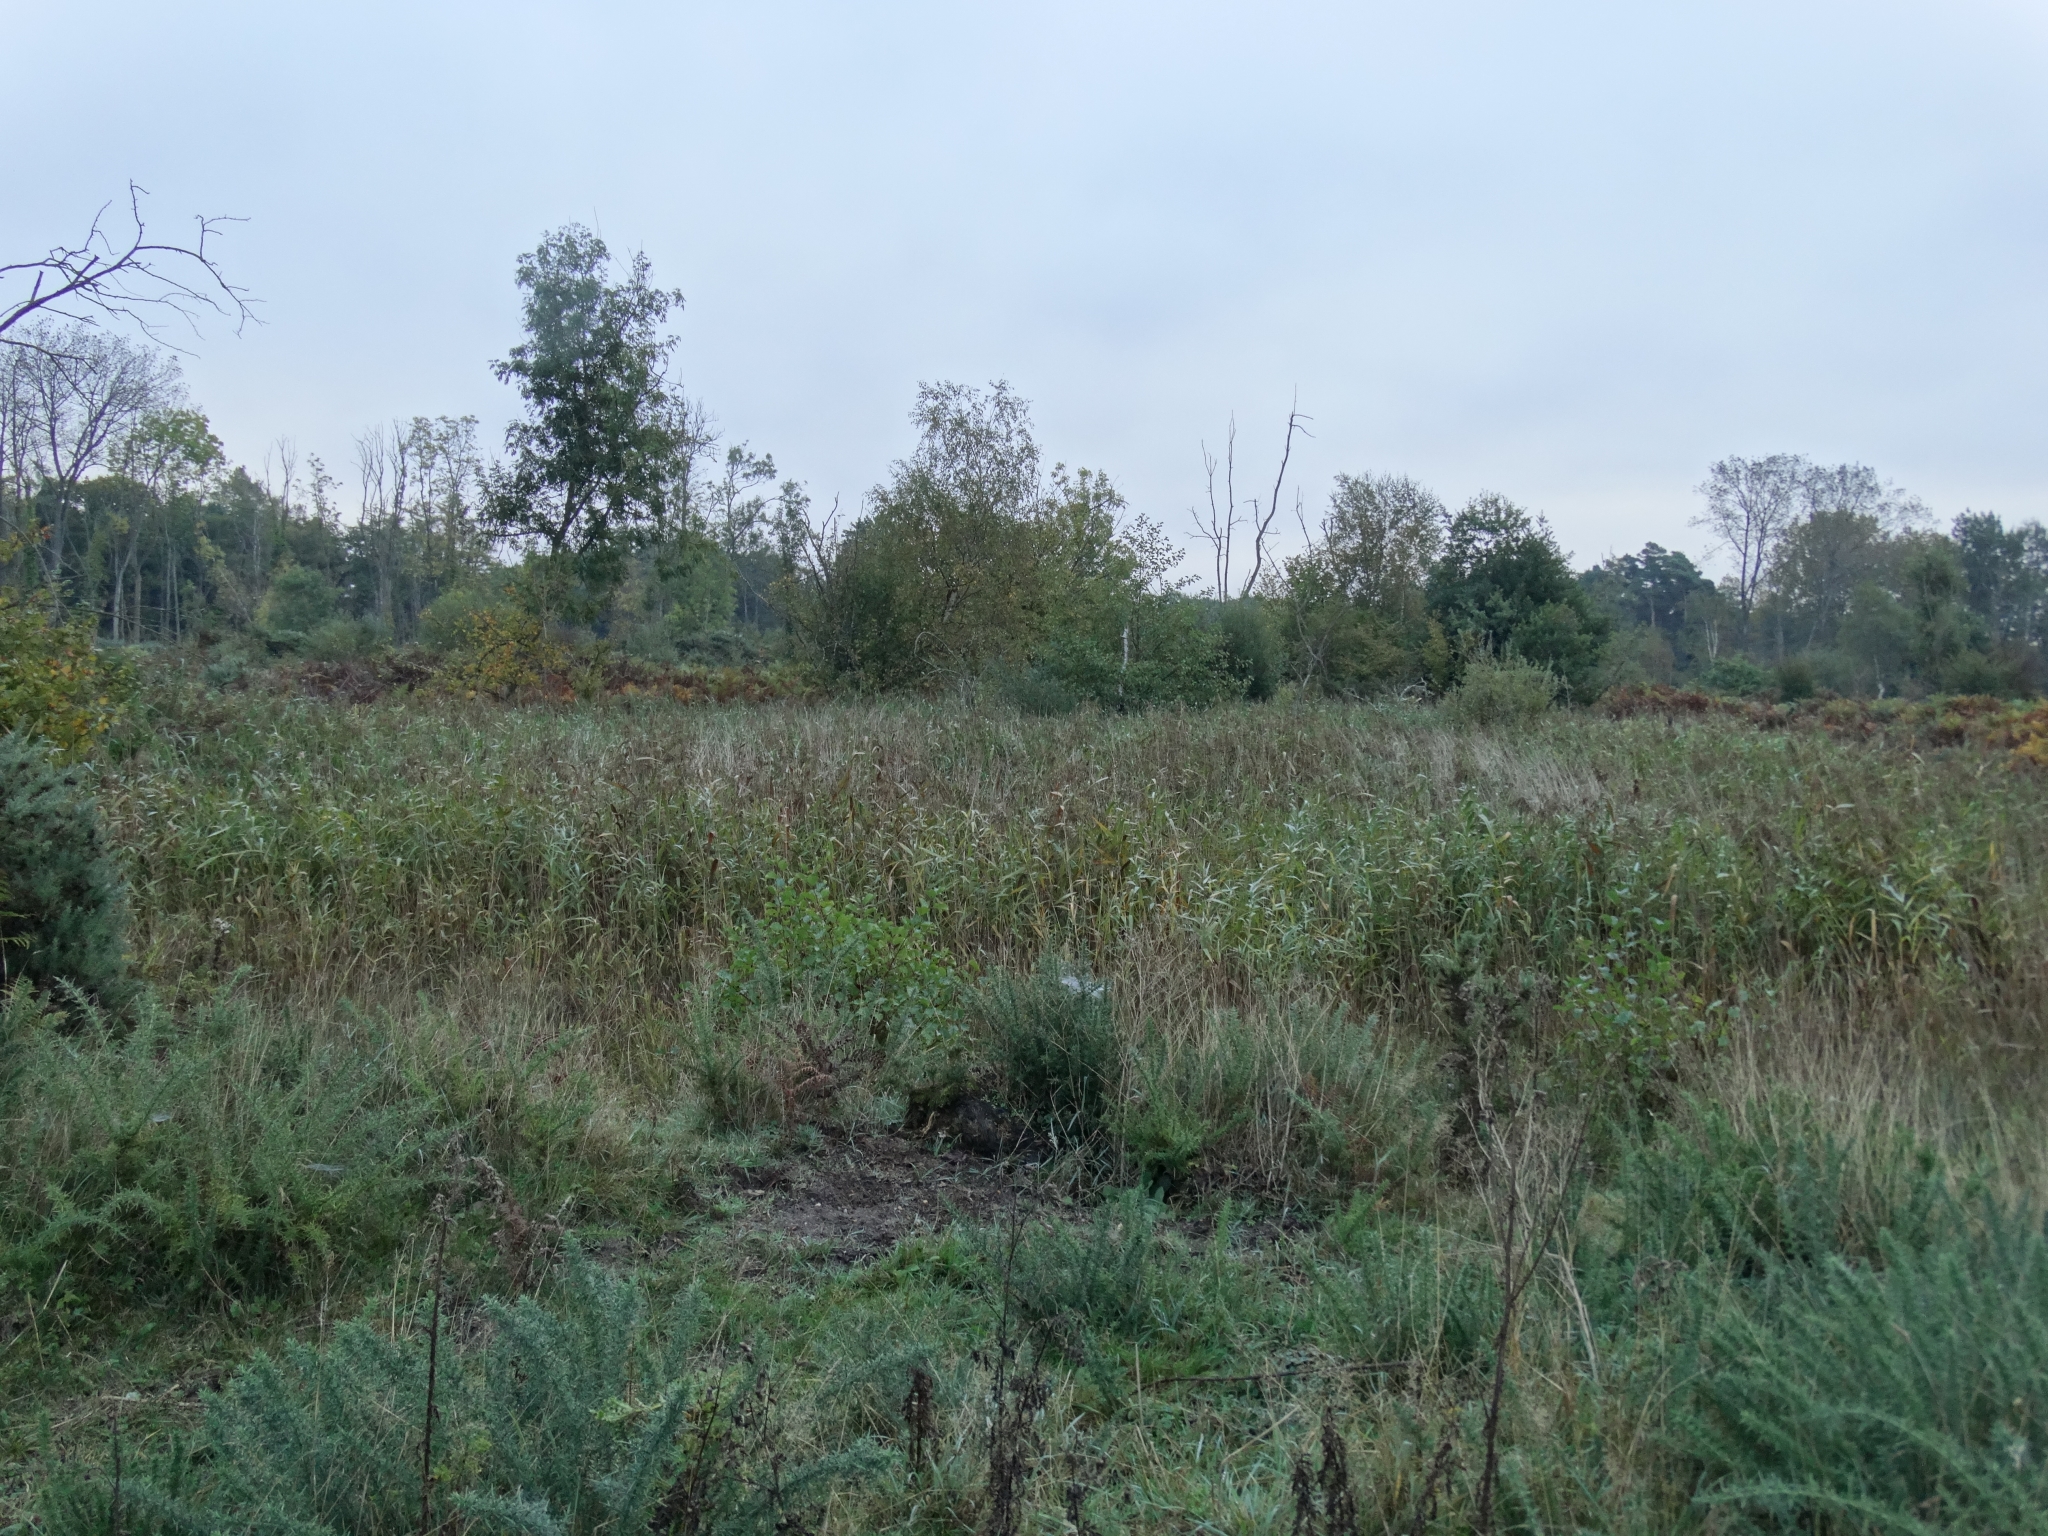 A photo from the FoTF Conservation Event - October 2019 - Gorse Clearance at Hockham Hills & Holes : A dog walks amongst the Bracken